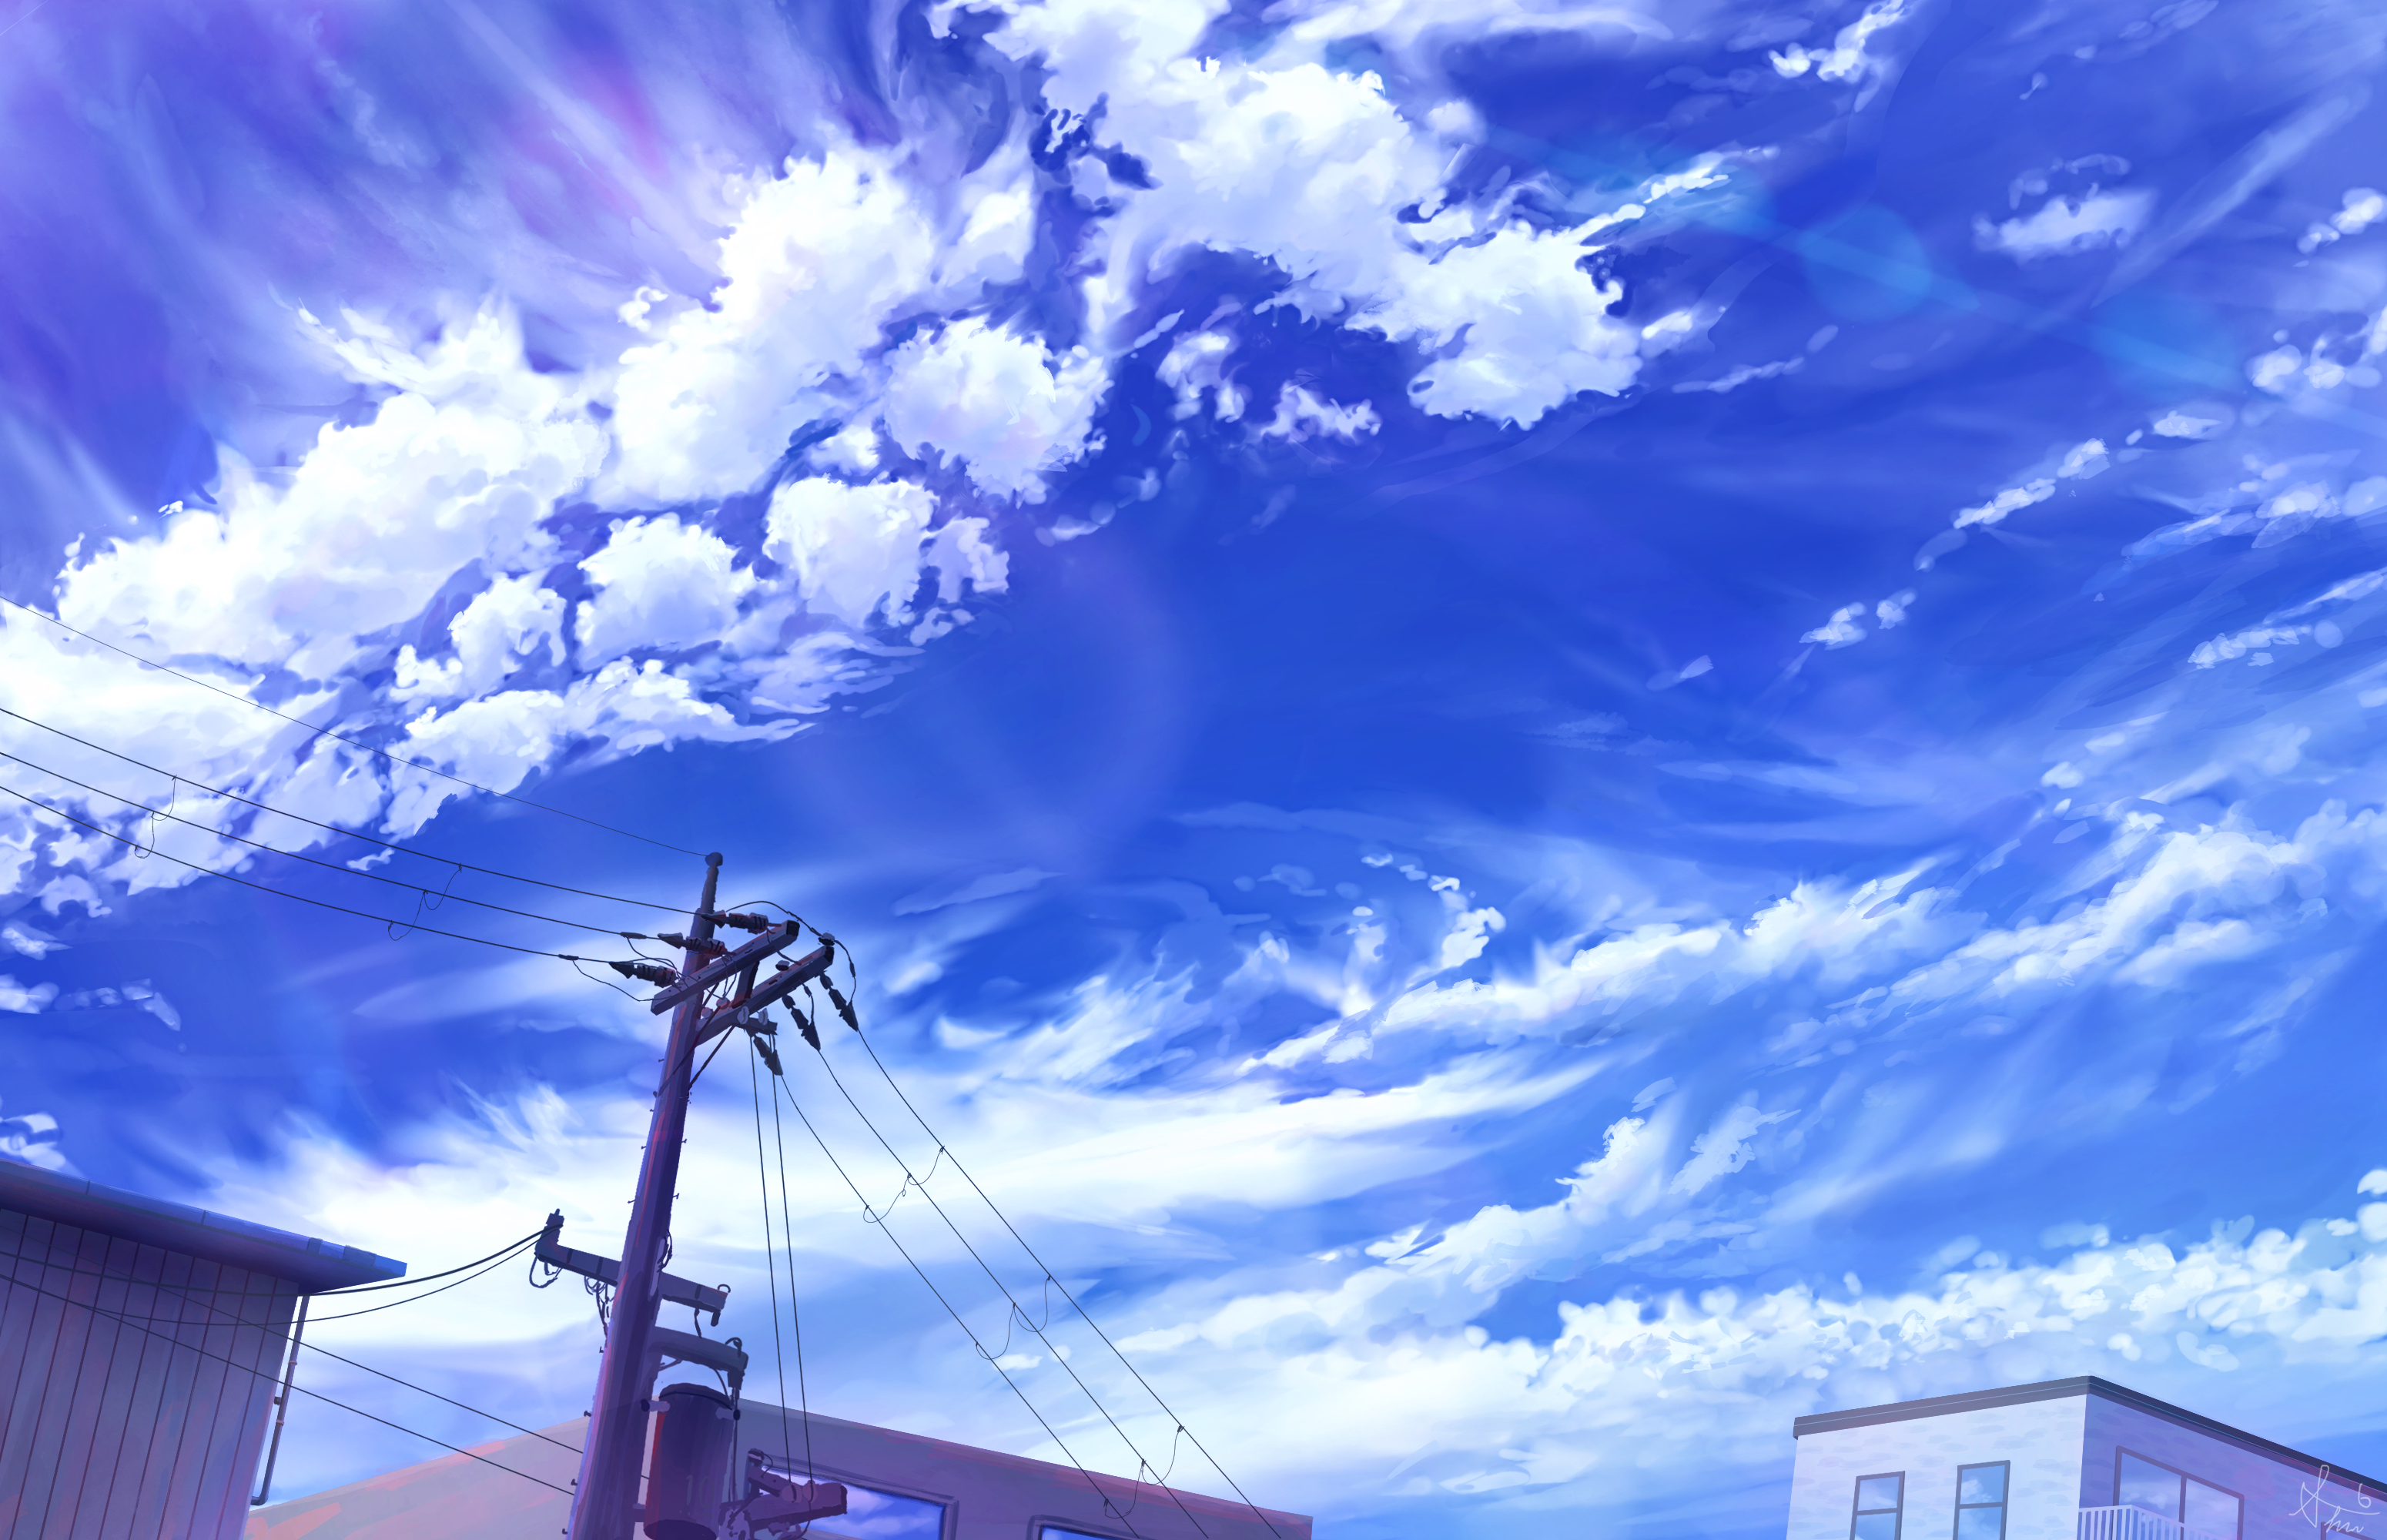 ANIME SKYBOX V1 in Materials - UE Marketplace